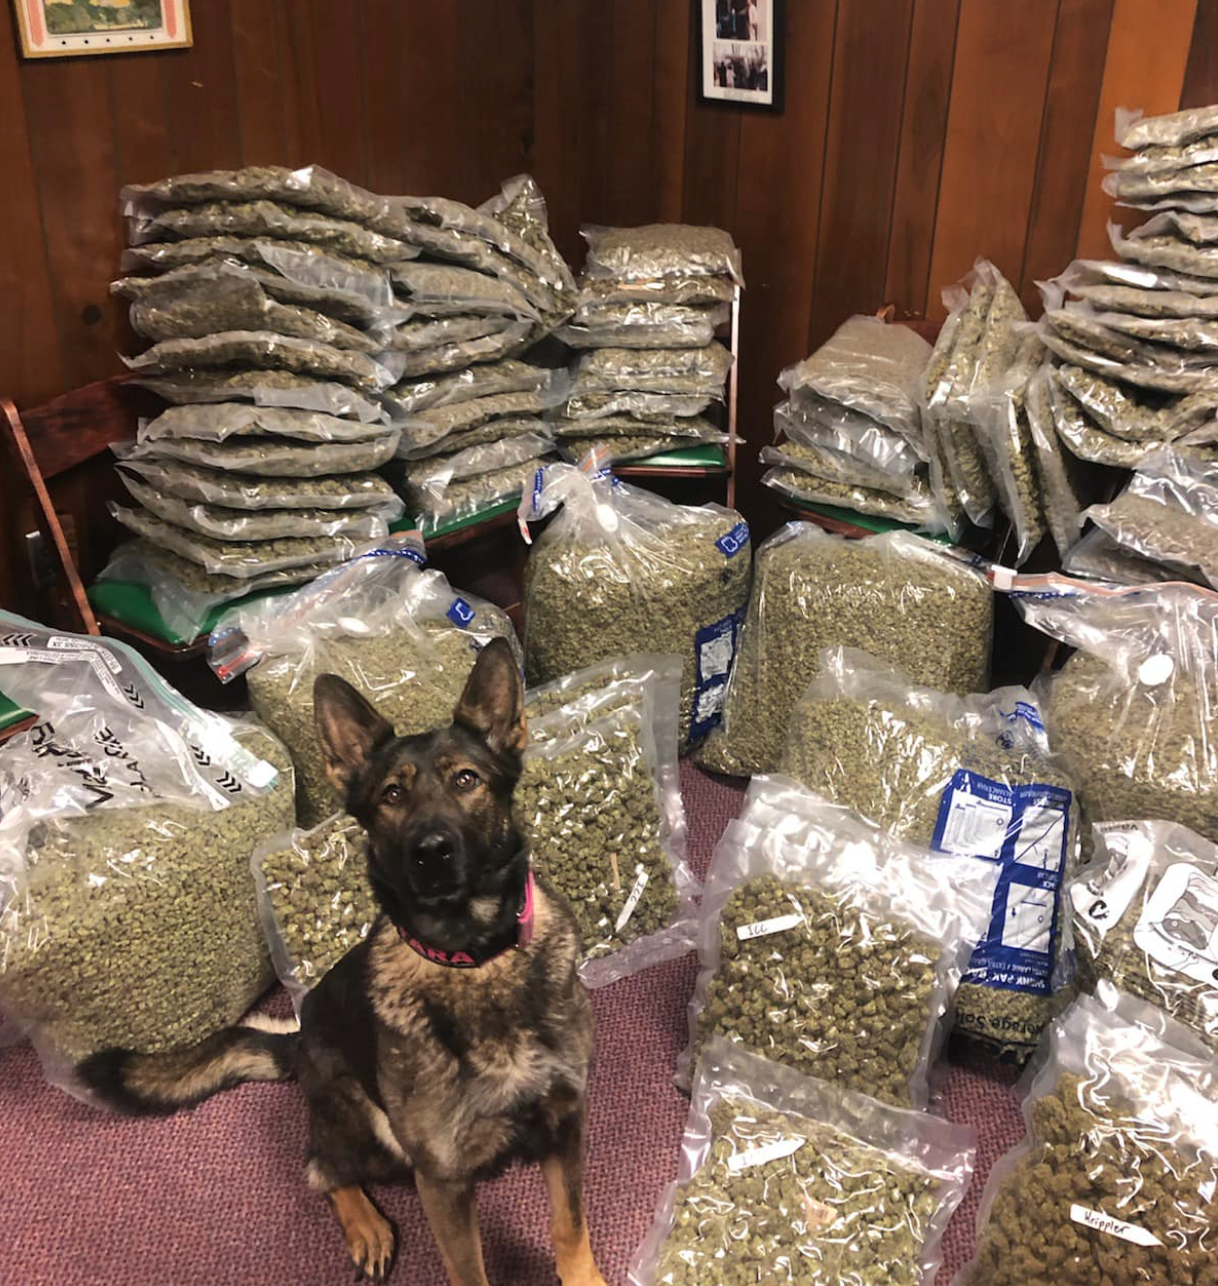 Traffic stop on I-59 NB leads to discovery of 250 lbs of weed